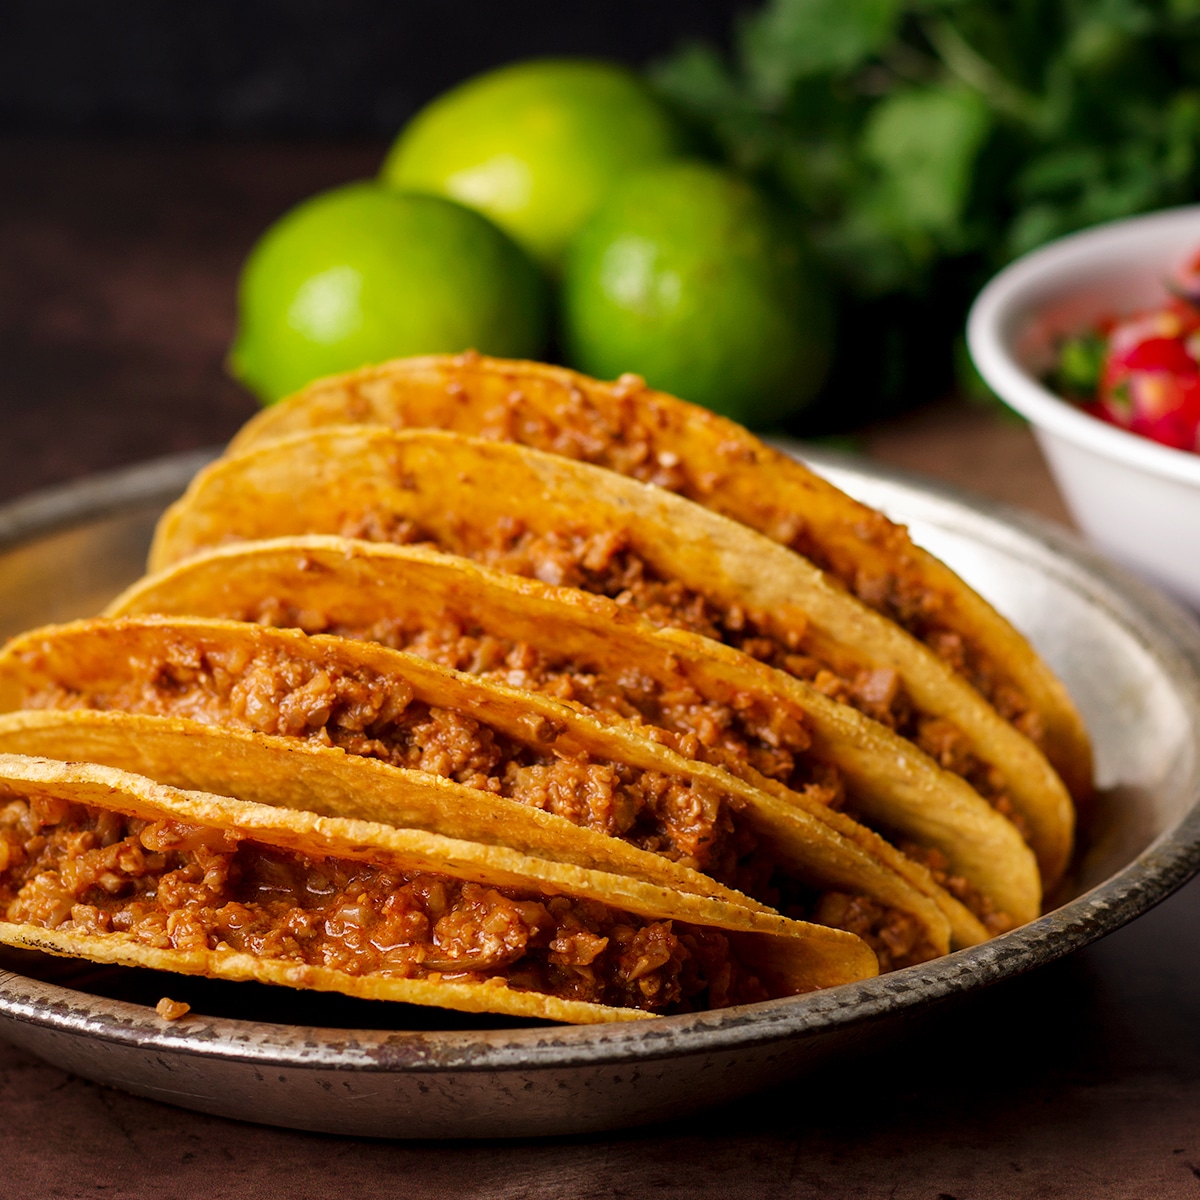 A tin plate filled with hard shell tacos stuffed with vegan taco meat.